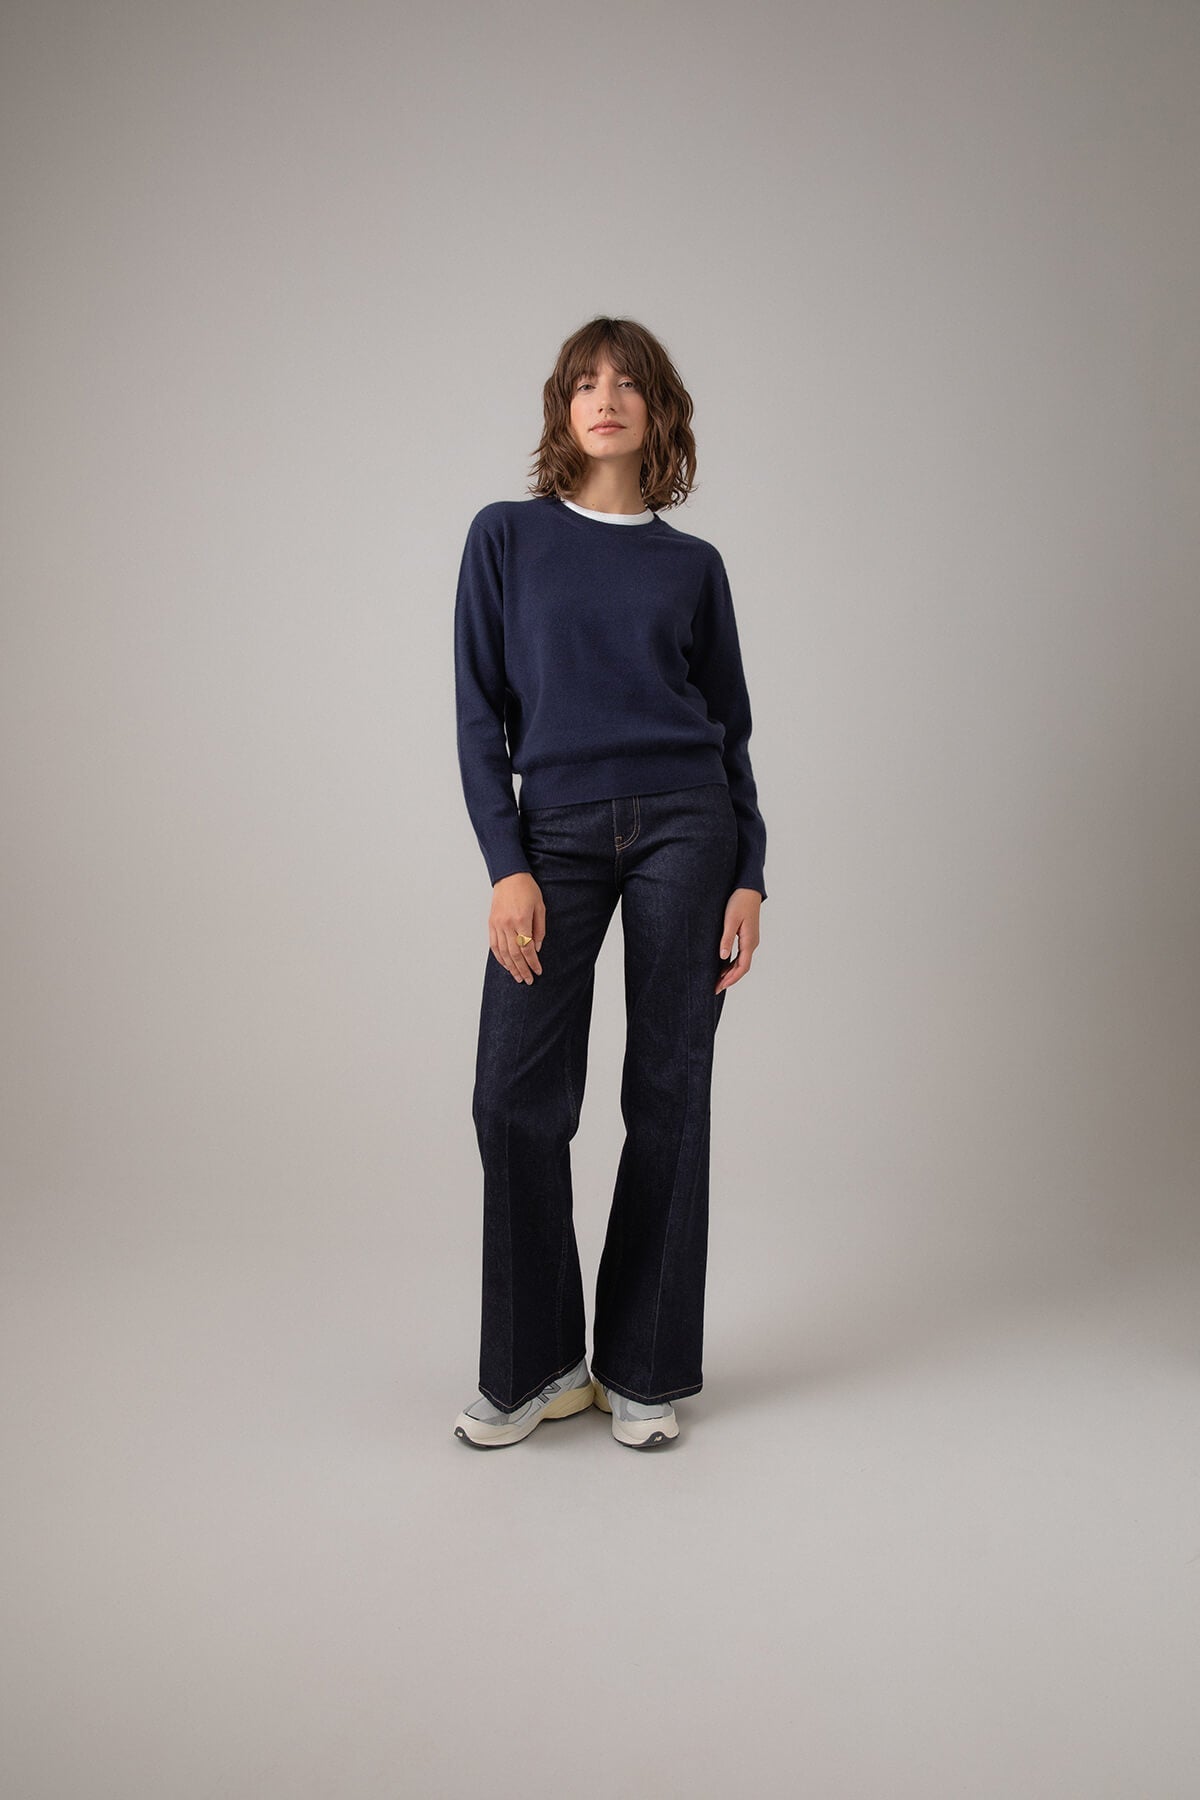  Johnstons of Elgin Classic Women's Cashmere Cropped Round Neck Jumper in Navy worn with Jeans on a grey background KAI05142SD0707